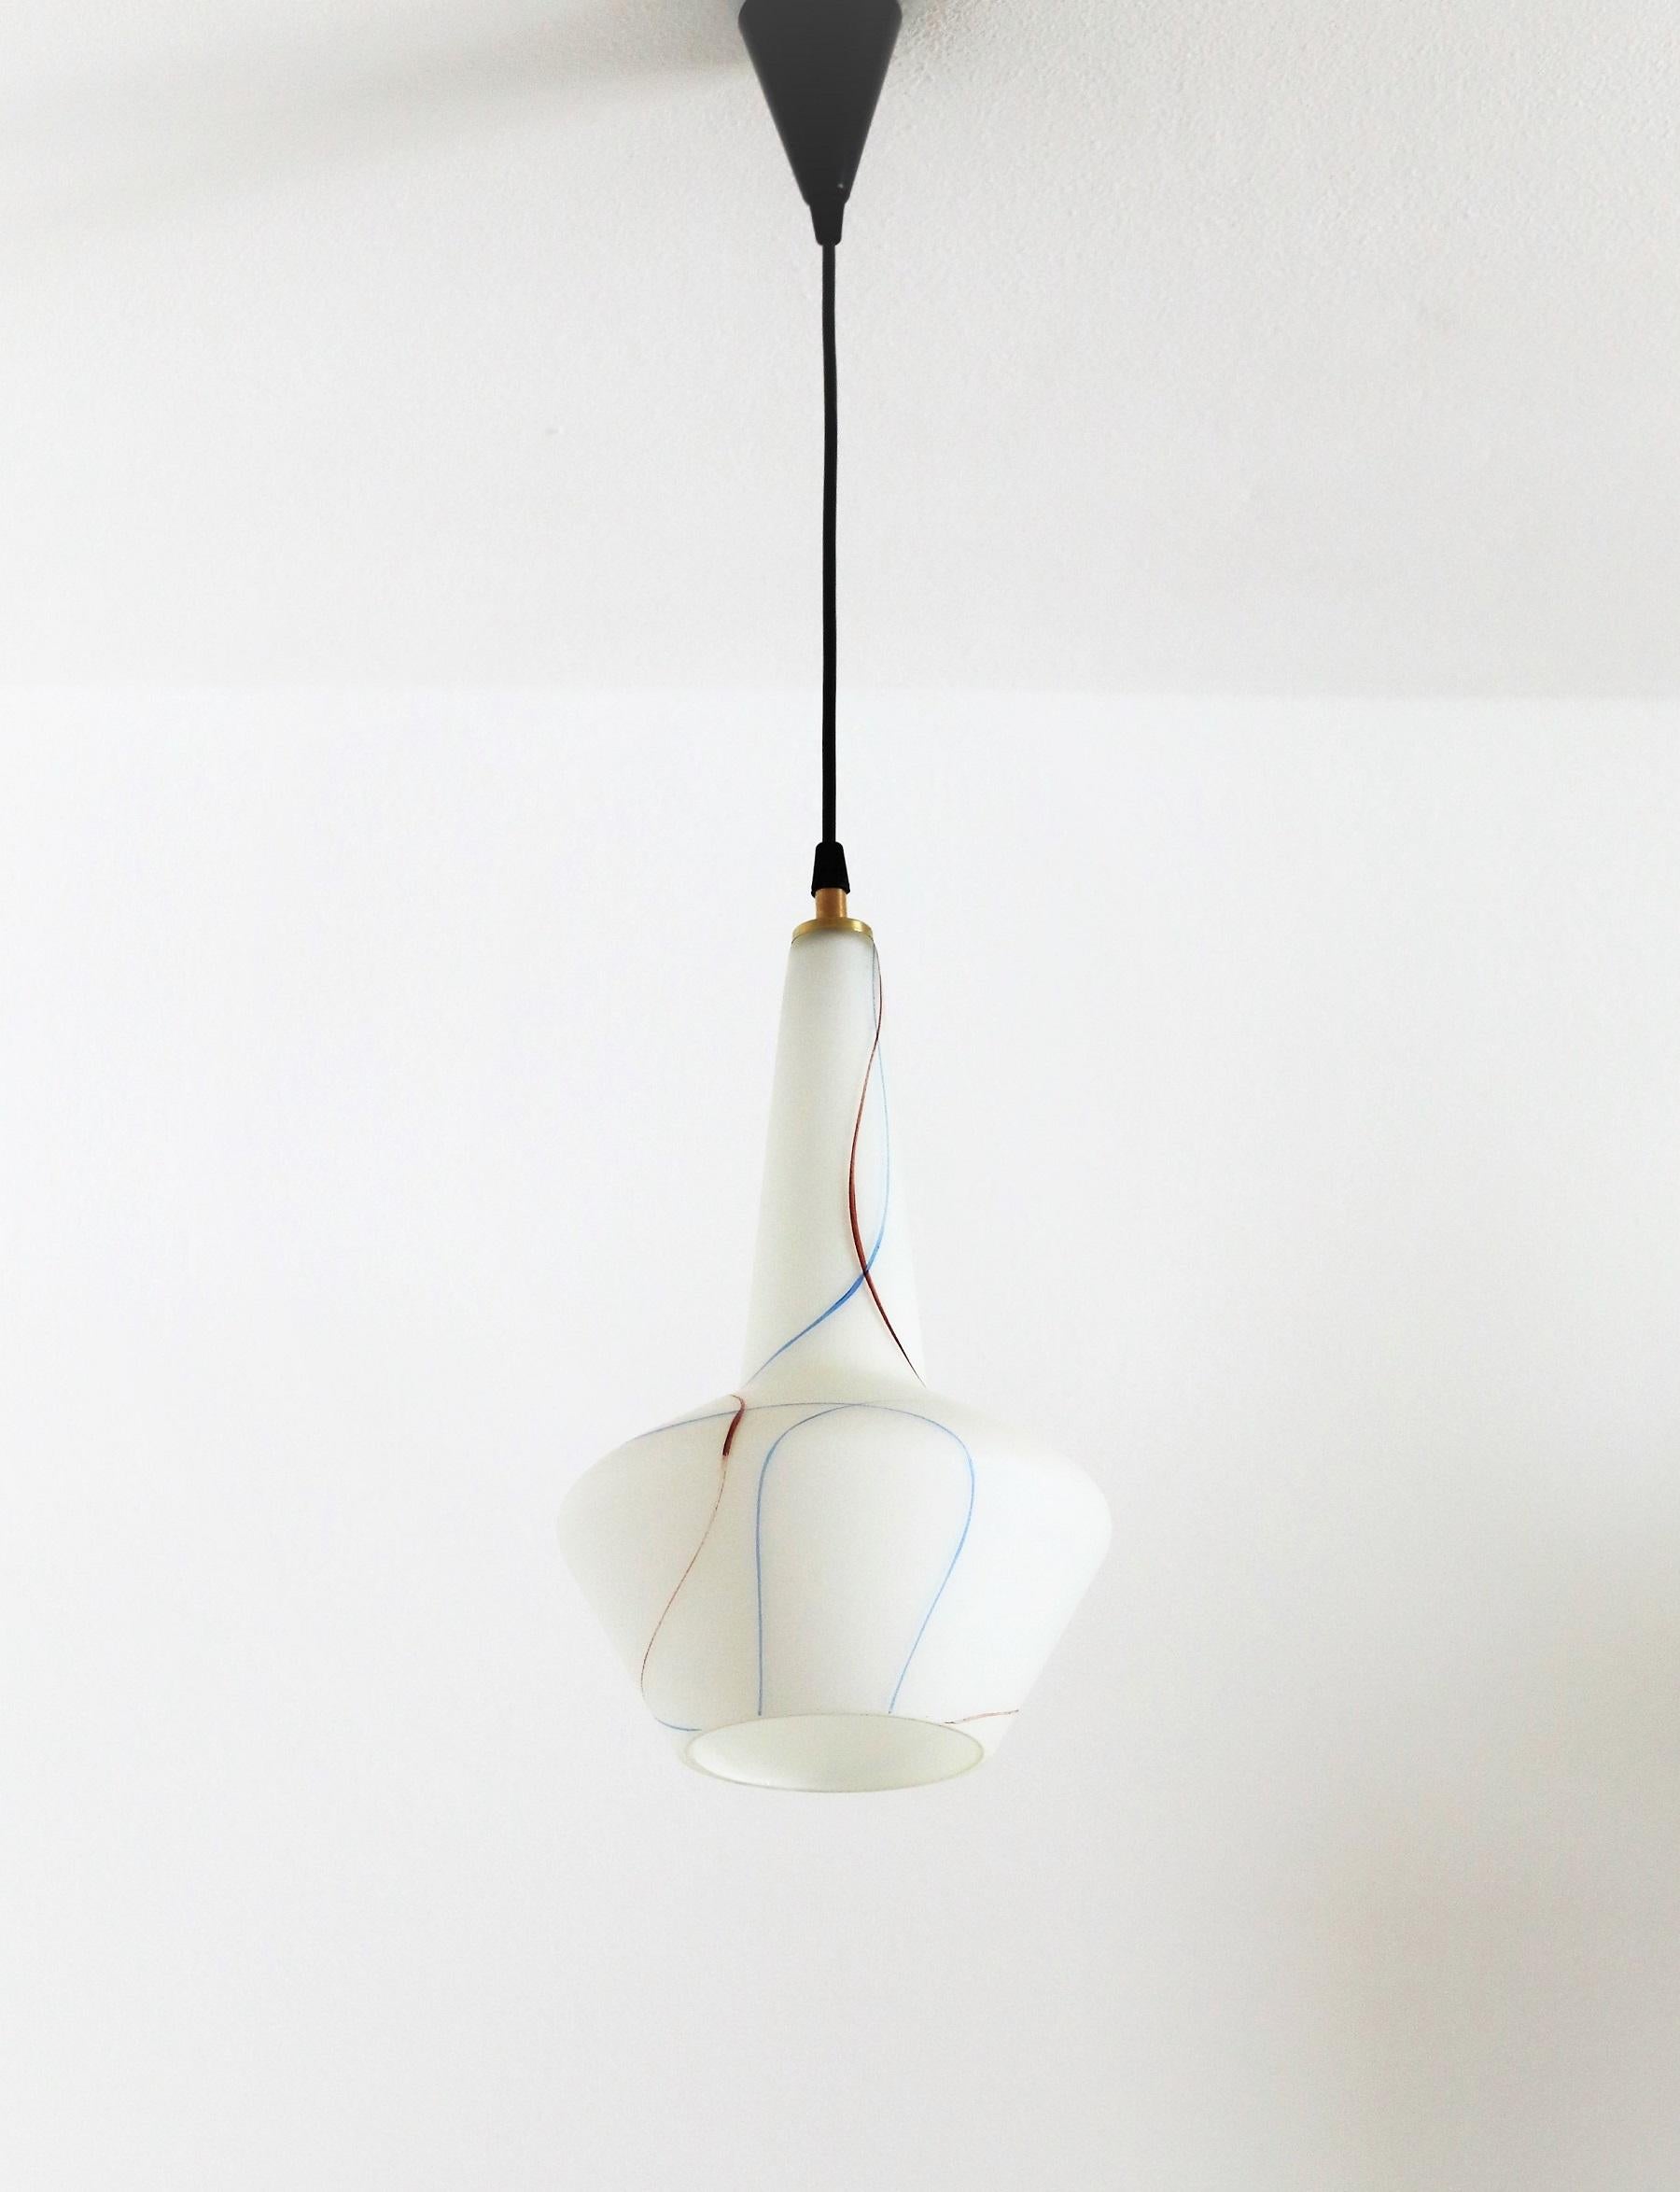 Beautiful tiny pendant lamp made of Murano glass in Italy during the 1970s.
The glass part is hand-crafted in white glass with red and blue irregular stripes within the glass. You can see the glass is made of more layers. (take a closer look to the